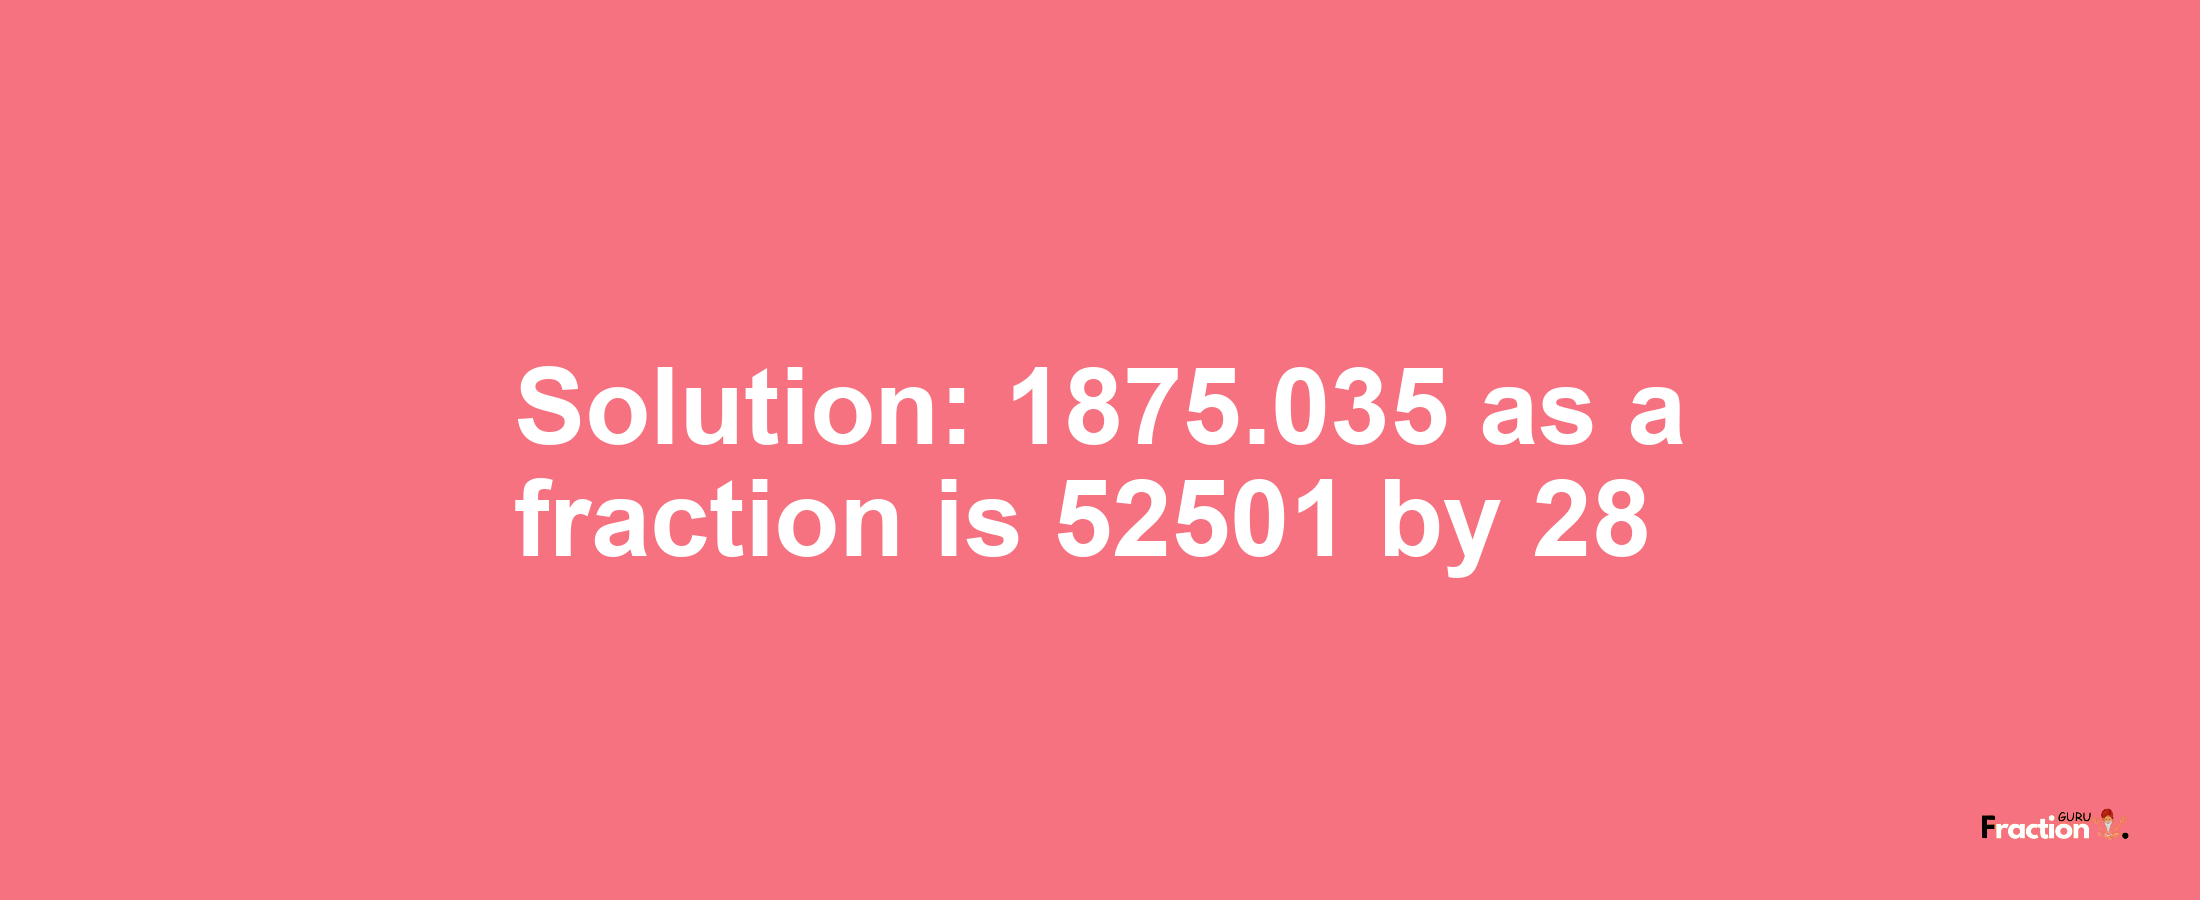 Solution:1875.035 as a fraction is 52501/28